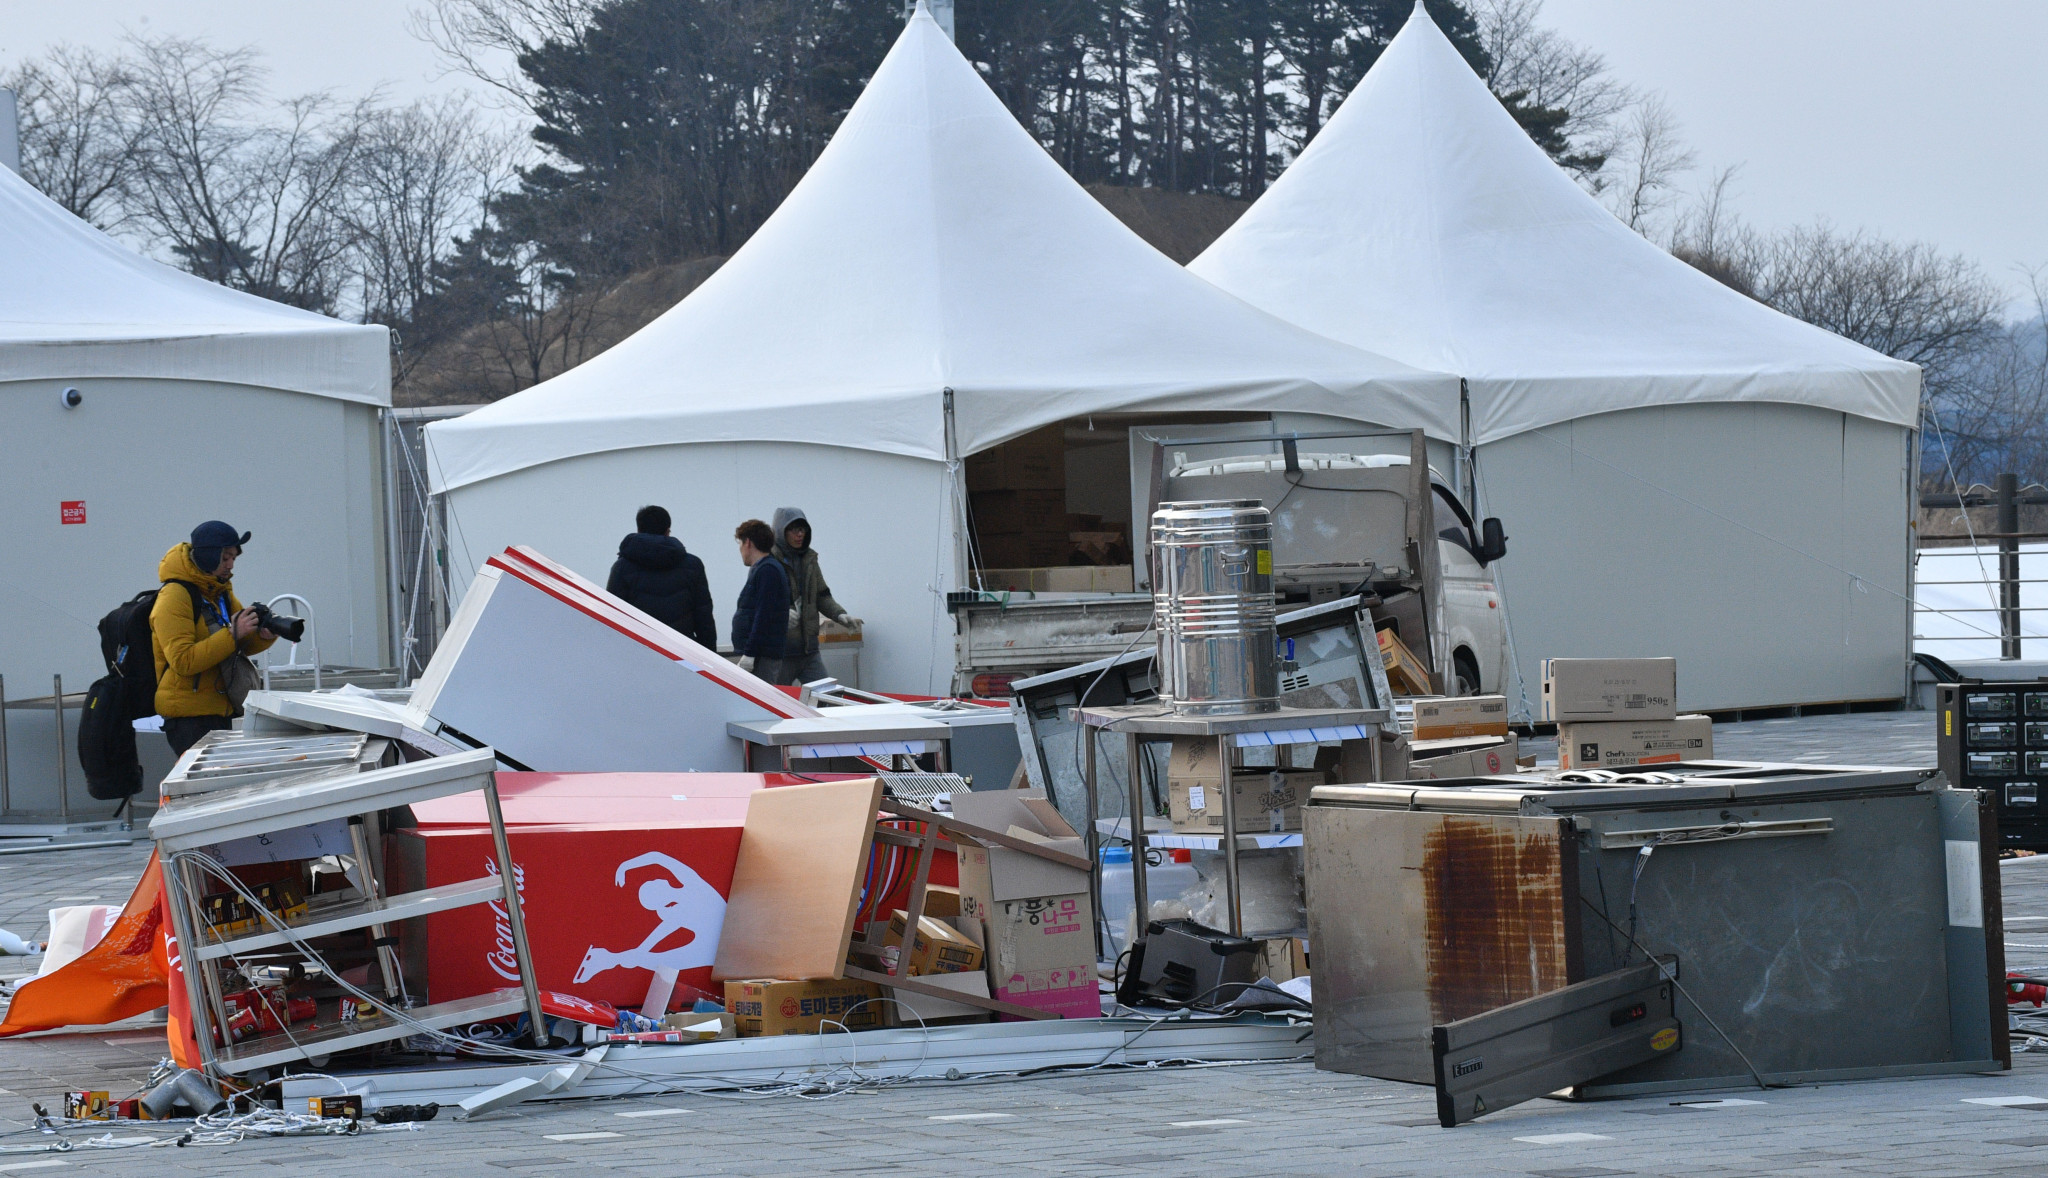 Pyeongchang 2018 close Gangneung Olympic Park as strong winds lead to safety fears